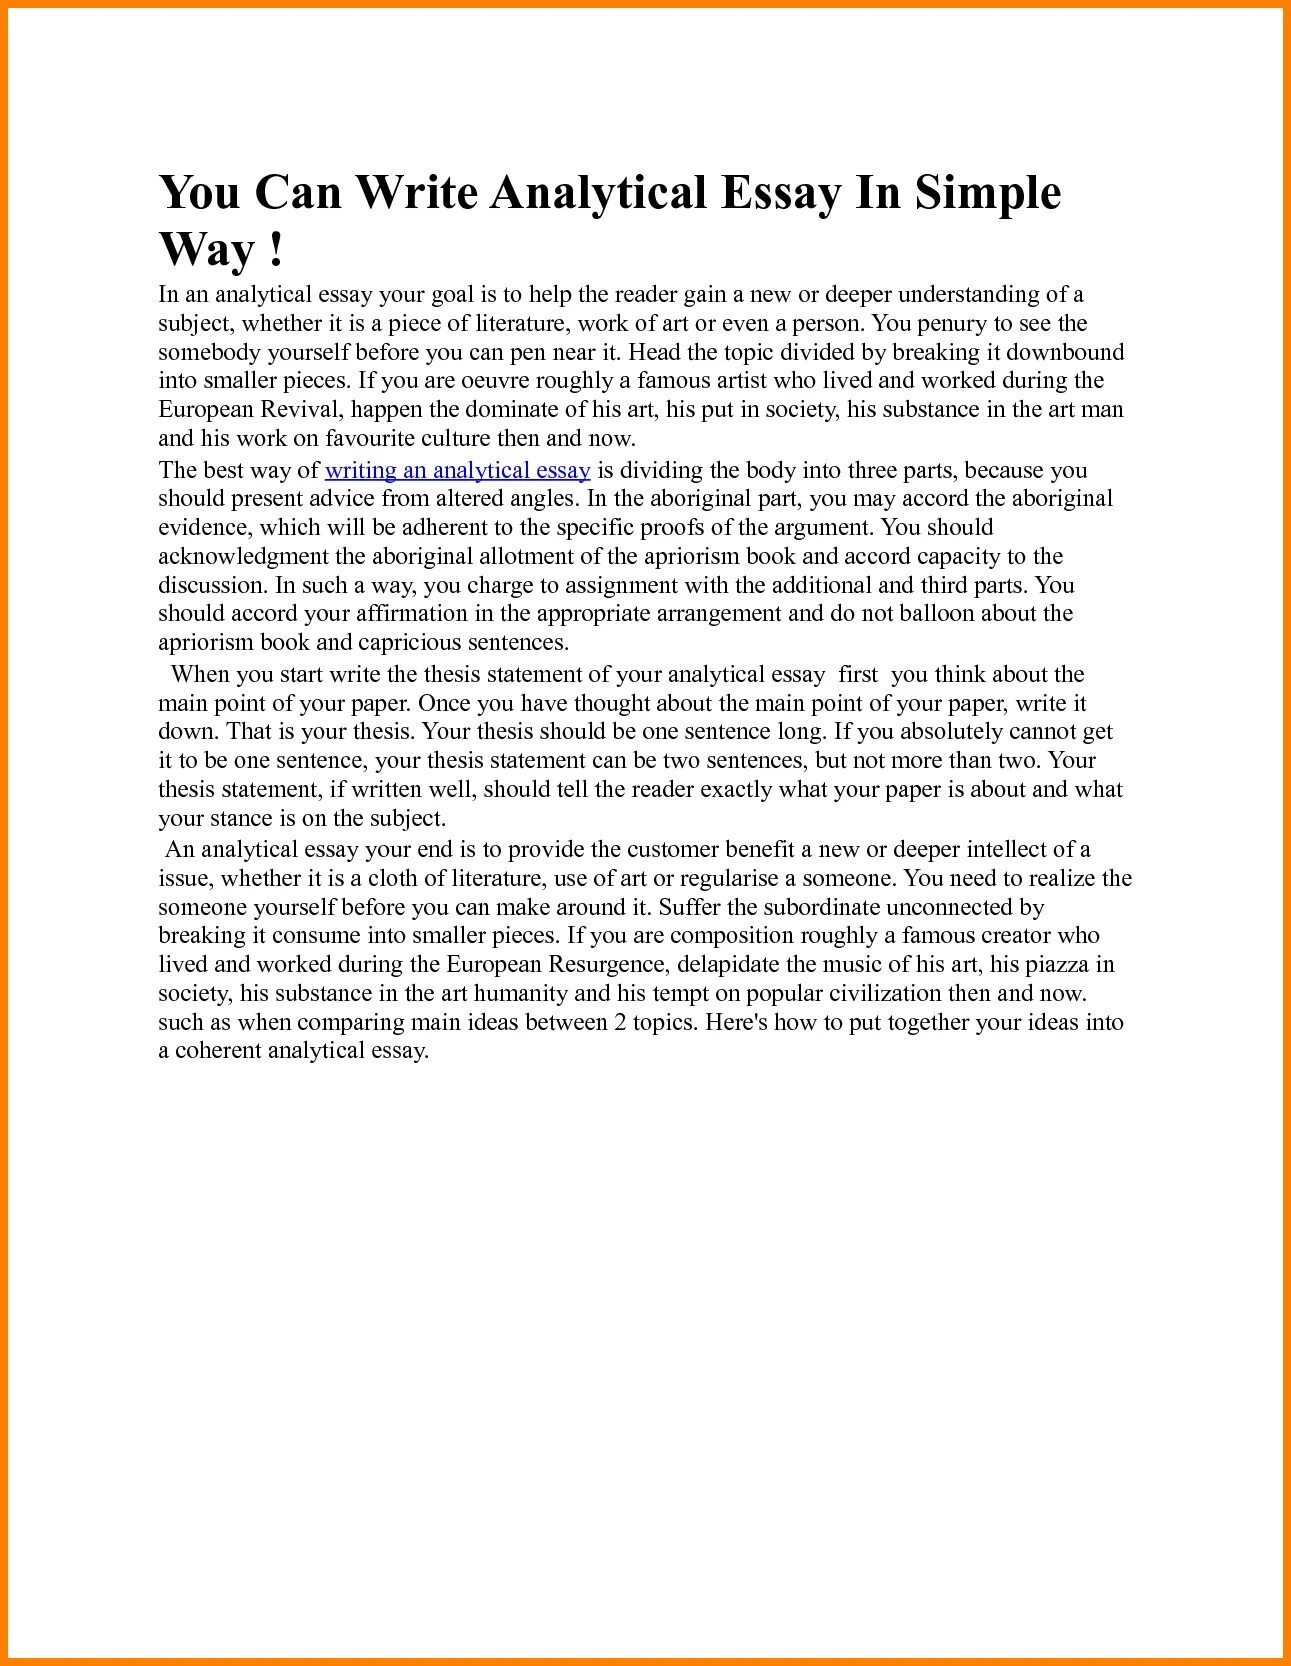 Essay exercises. Analytical essay examples. Character Analysis essay example. Write an essay about yourself\. How to write an analytical column.